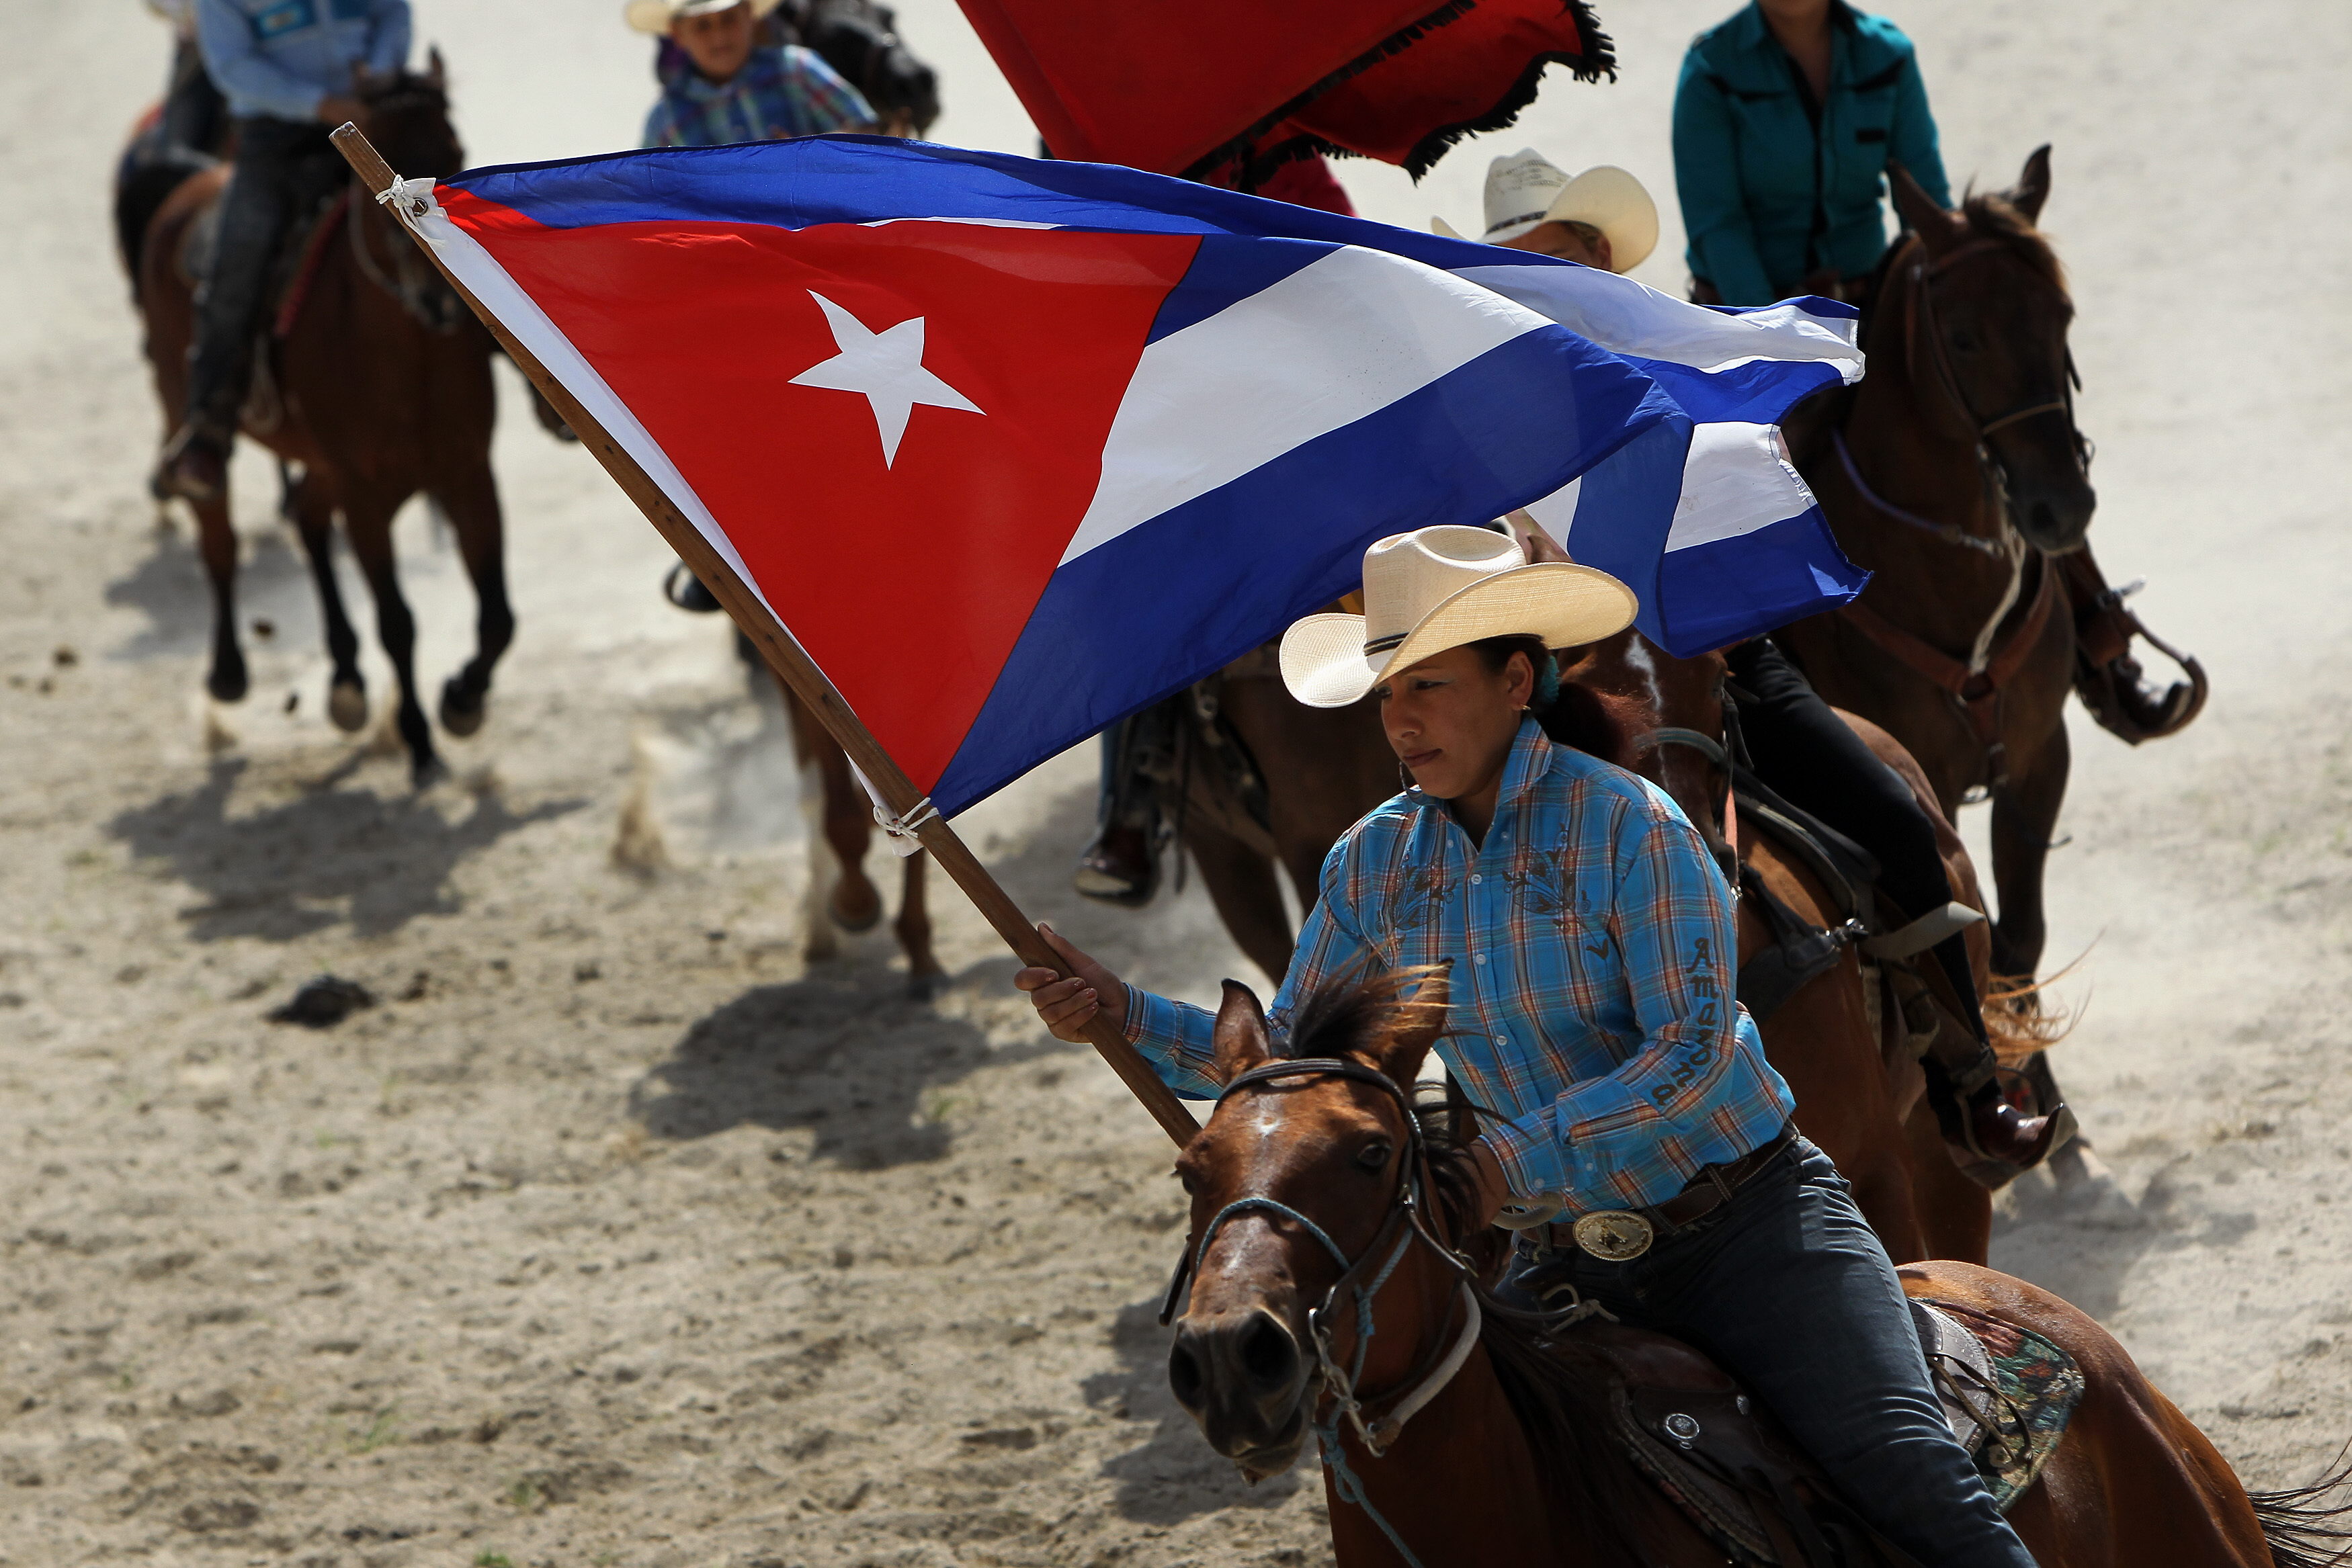 Rodeo participants during an exhibition at the Fiagrop inauguration ceremony in Havana, Cuba. March 15, 2014.